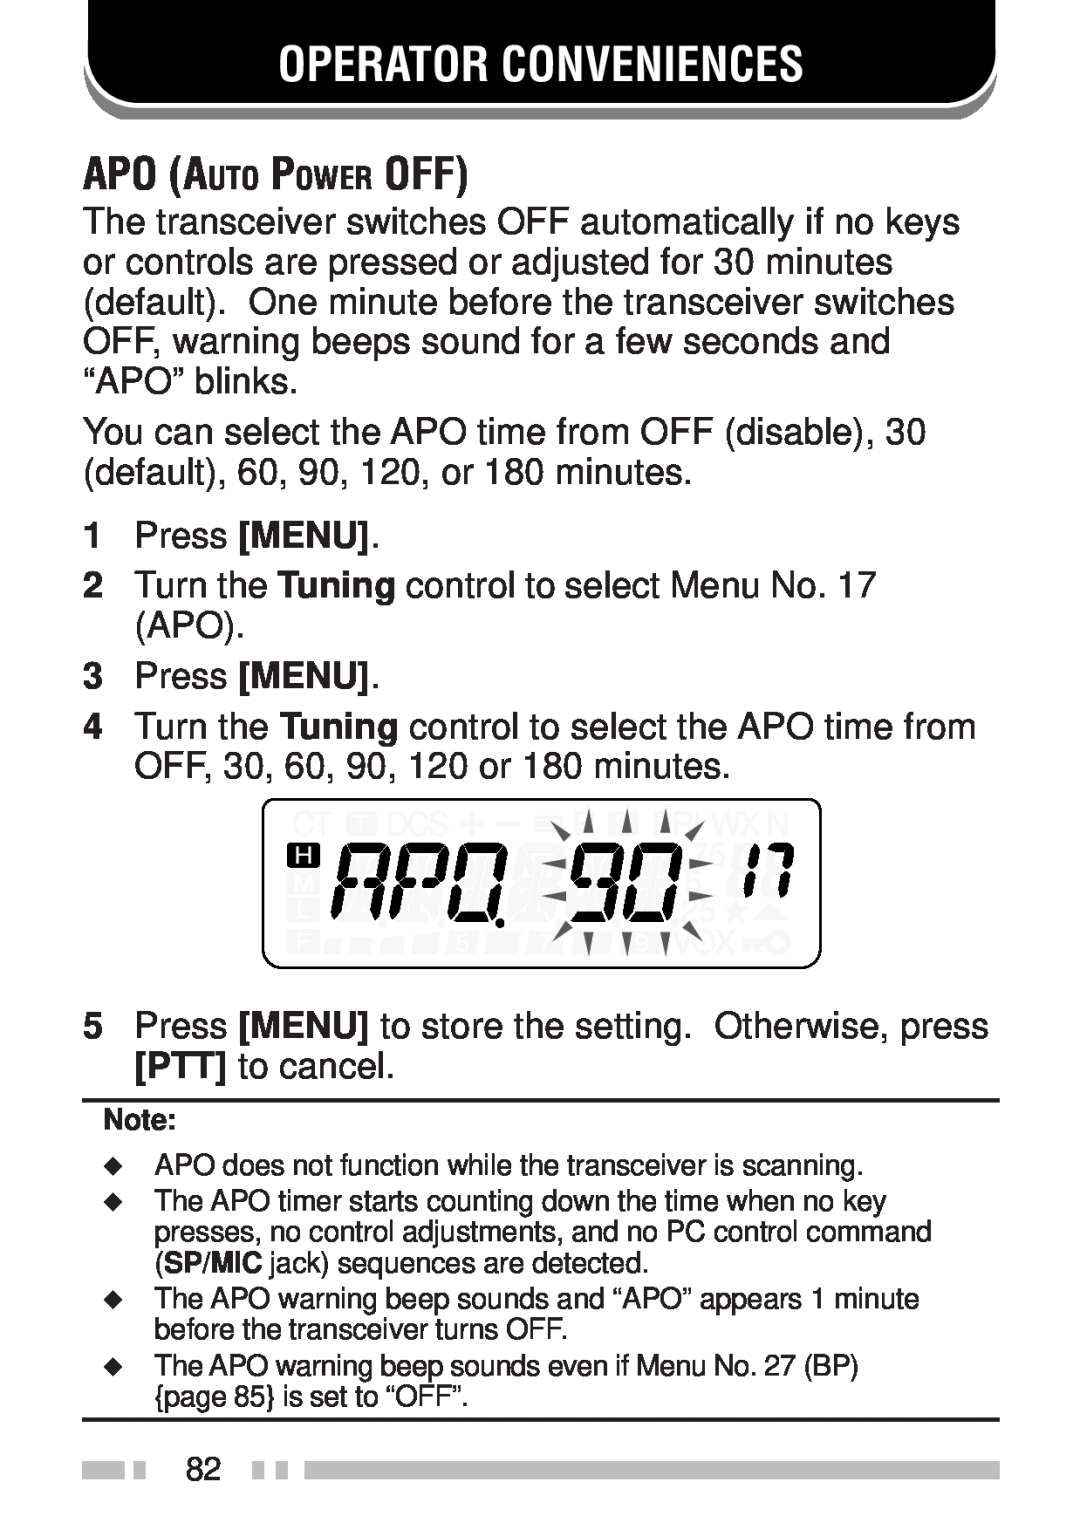 Kenwood TH-K4AT, TH-KAE, TH-K2ET, TH-K2AT instruction manual Operator Conveniences, Apo Auto Power Off 